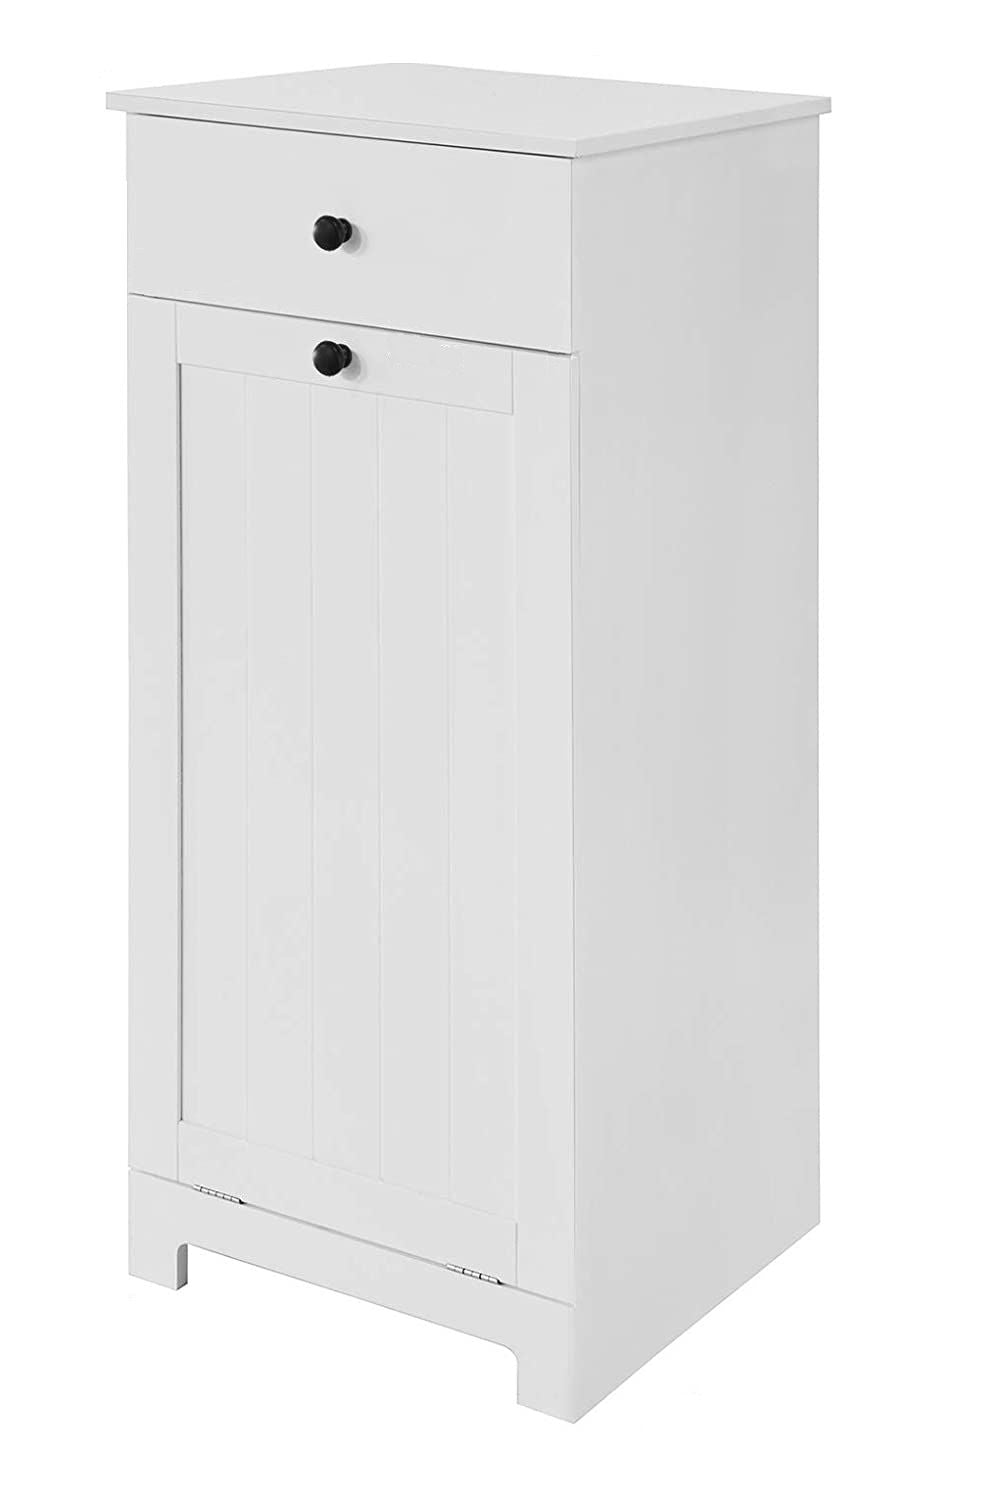 White Bathroom Cabinet with Built-in Laundry Basket and Drawer